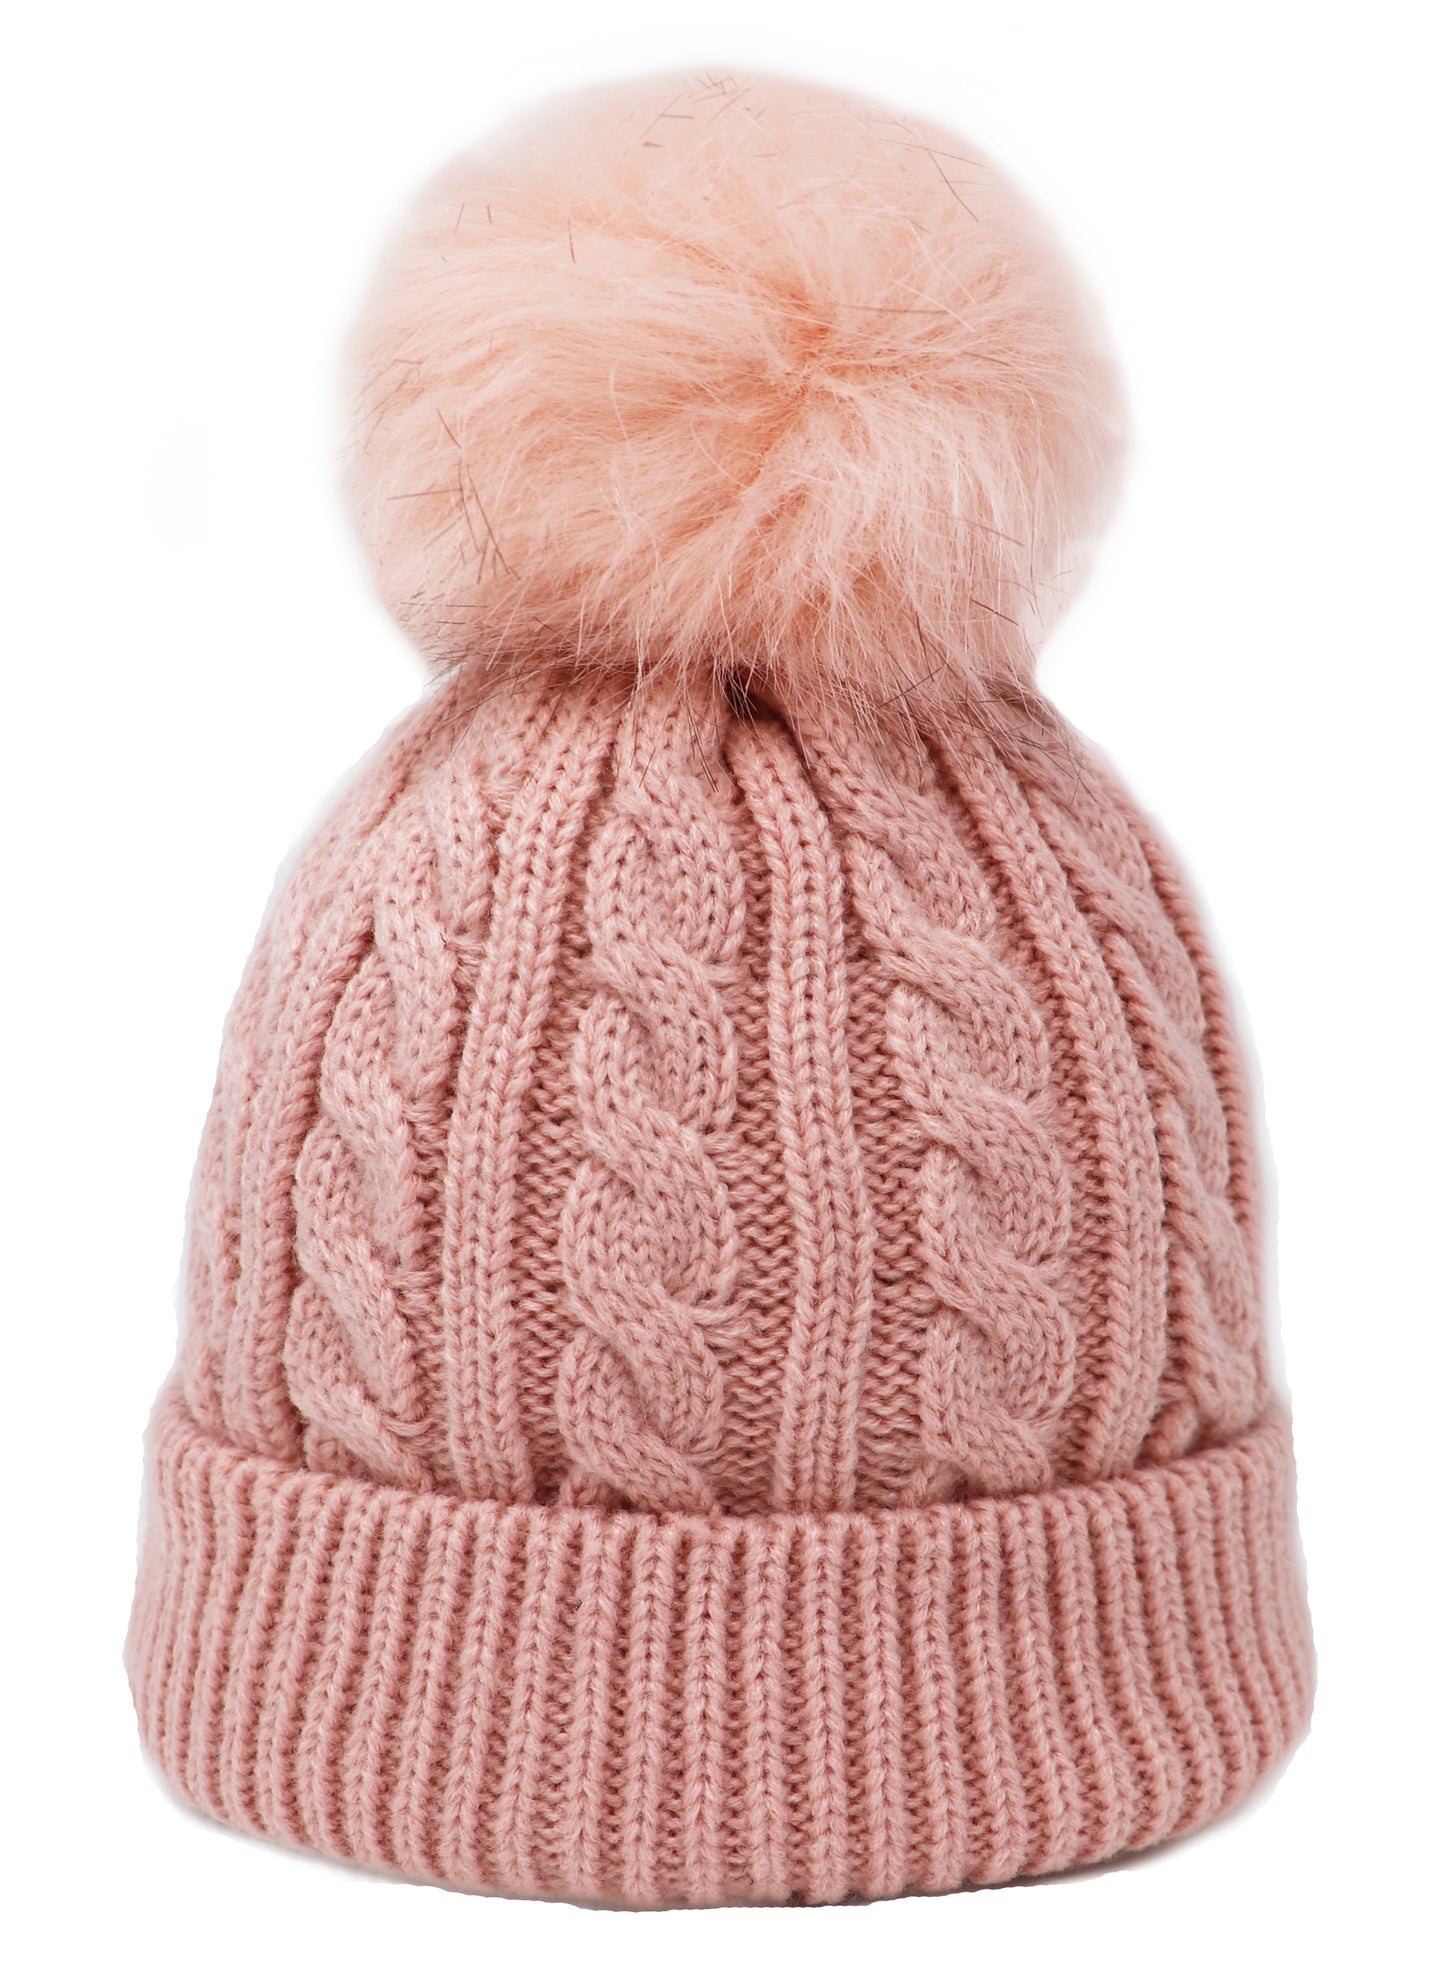 Kids Cable Knitted Pom Pom Hat